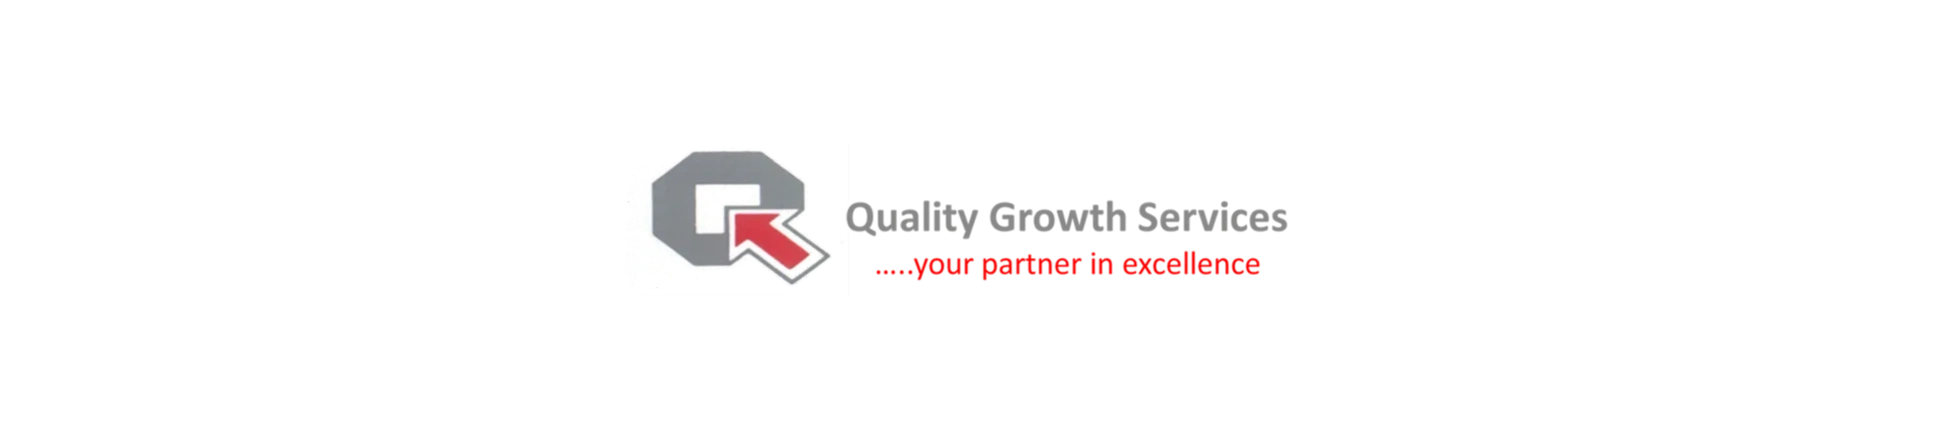 QUality Growth Services